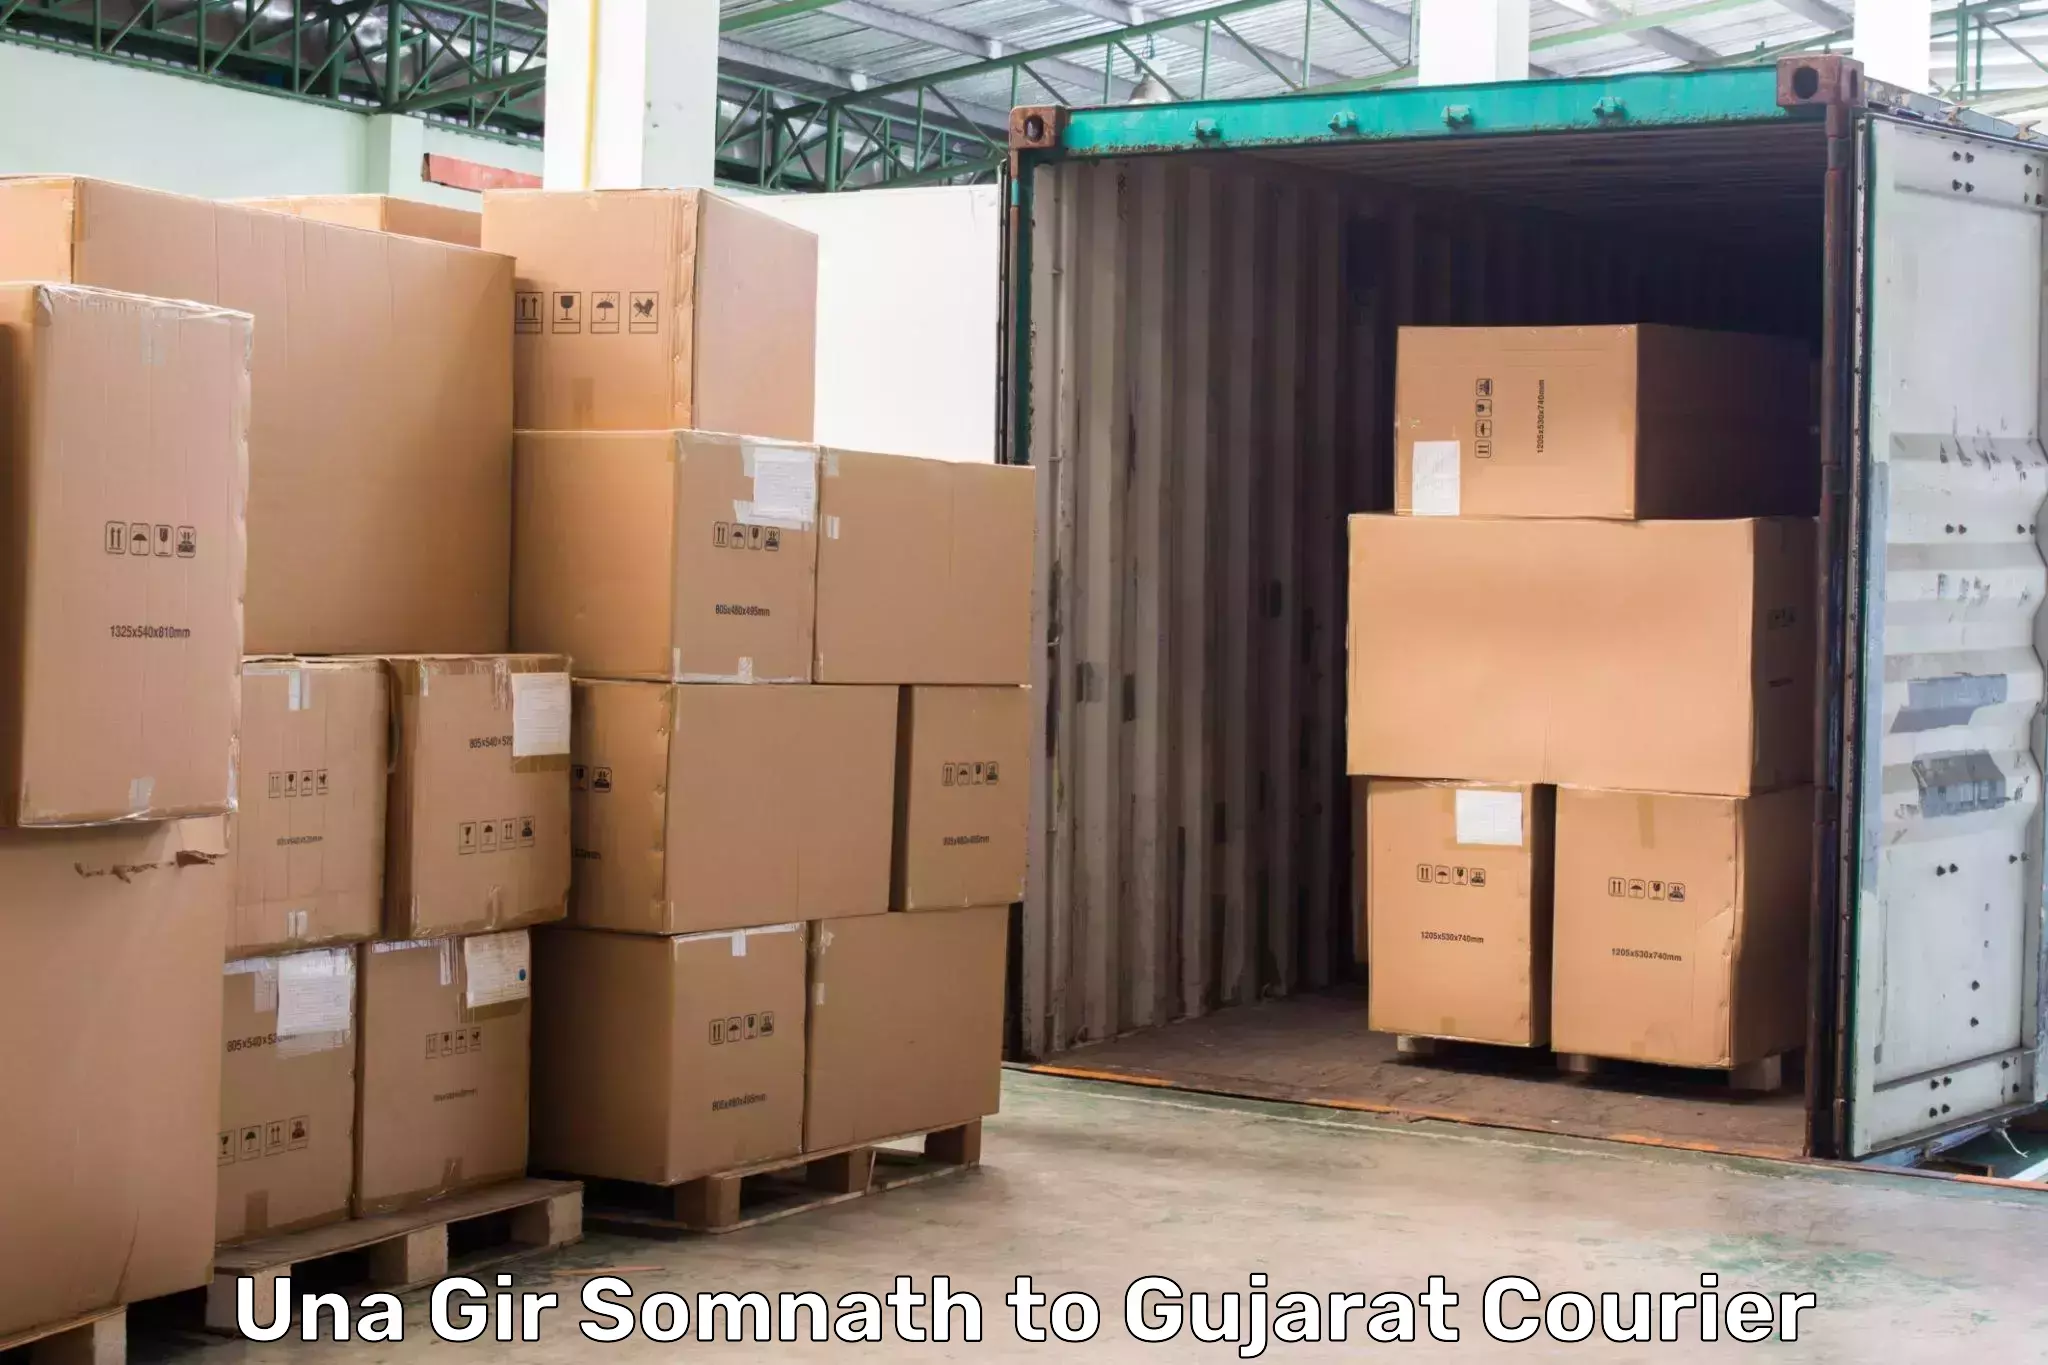 Reliable courier service Una Gir Somnath to Limkheda